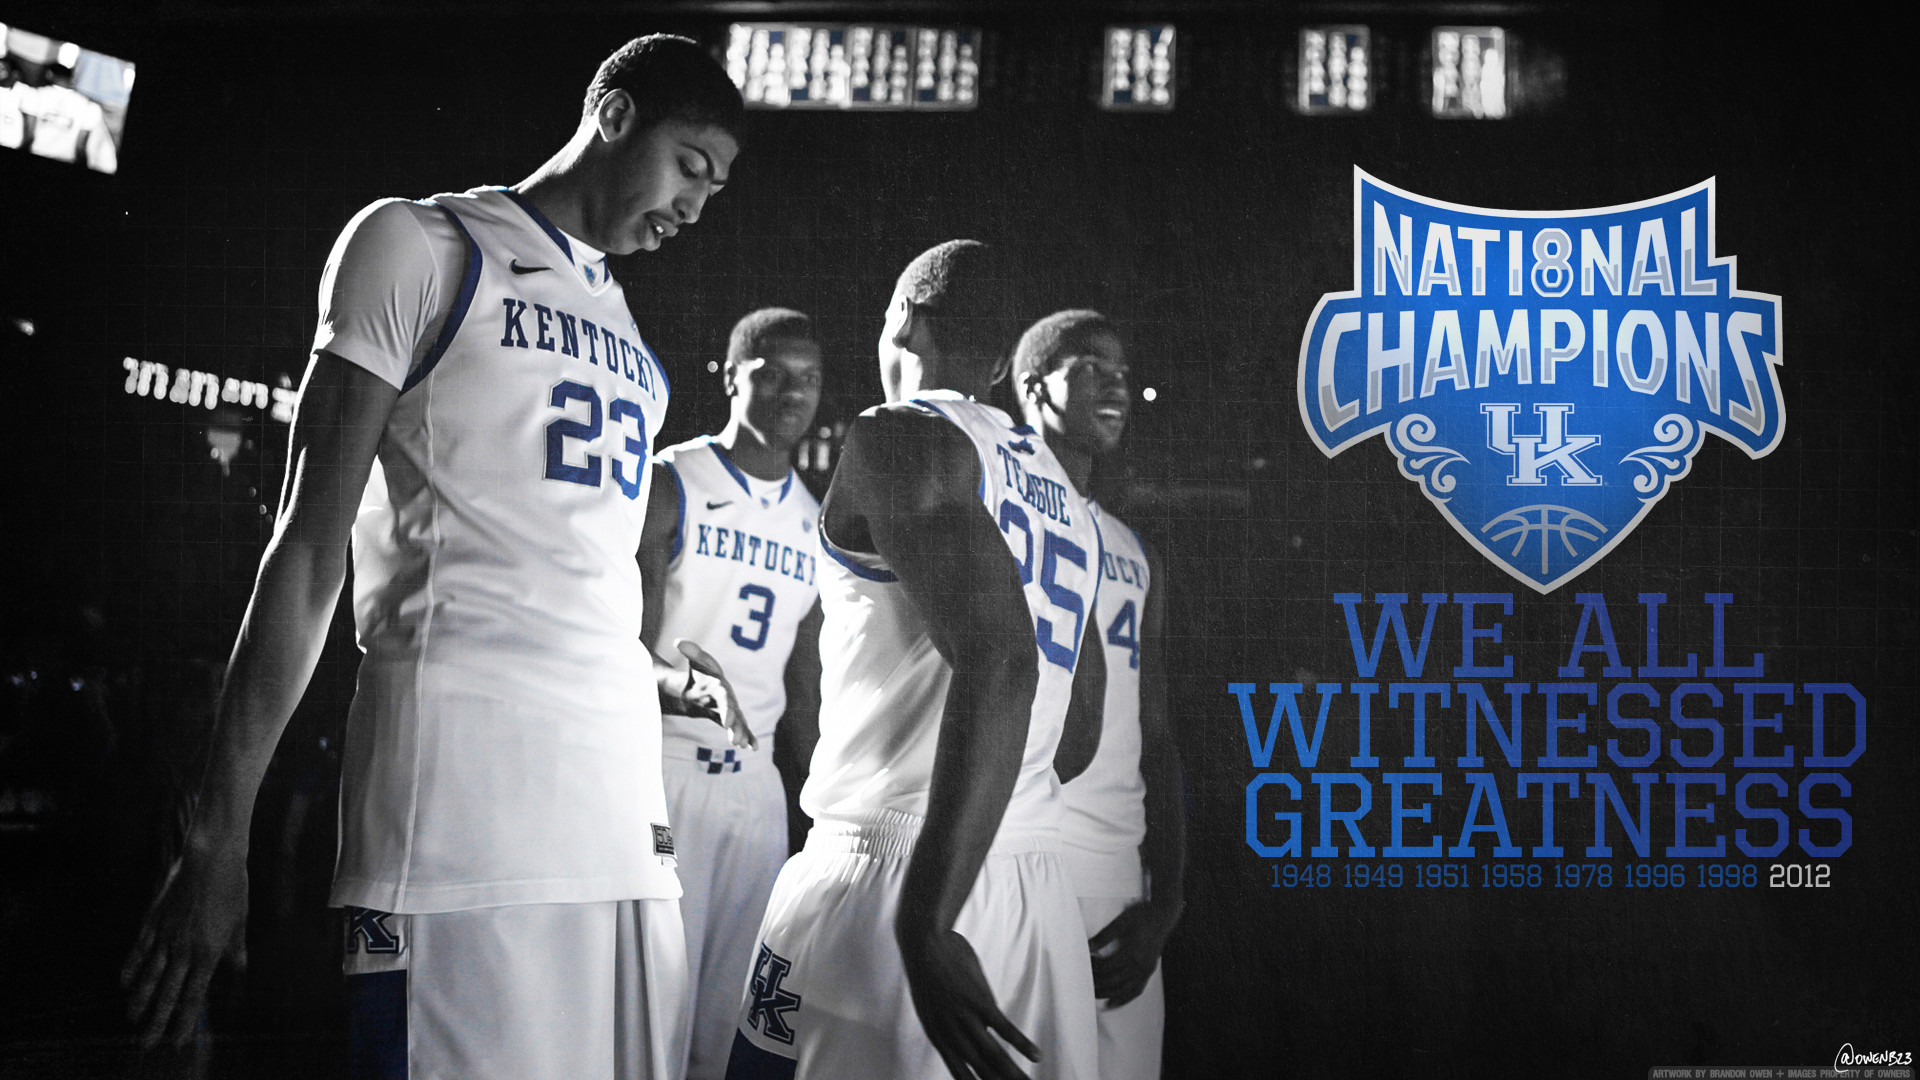 1920x1080 University of Kentucky Chrome Themes, iOS Wallpapers Blogs for 1280Ã960  Kentucky Basketball Wallpapers (47 Wallpapers) | Adorable Wallpapers |  Pinterest ...